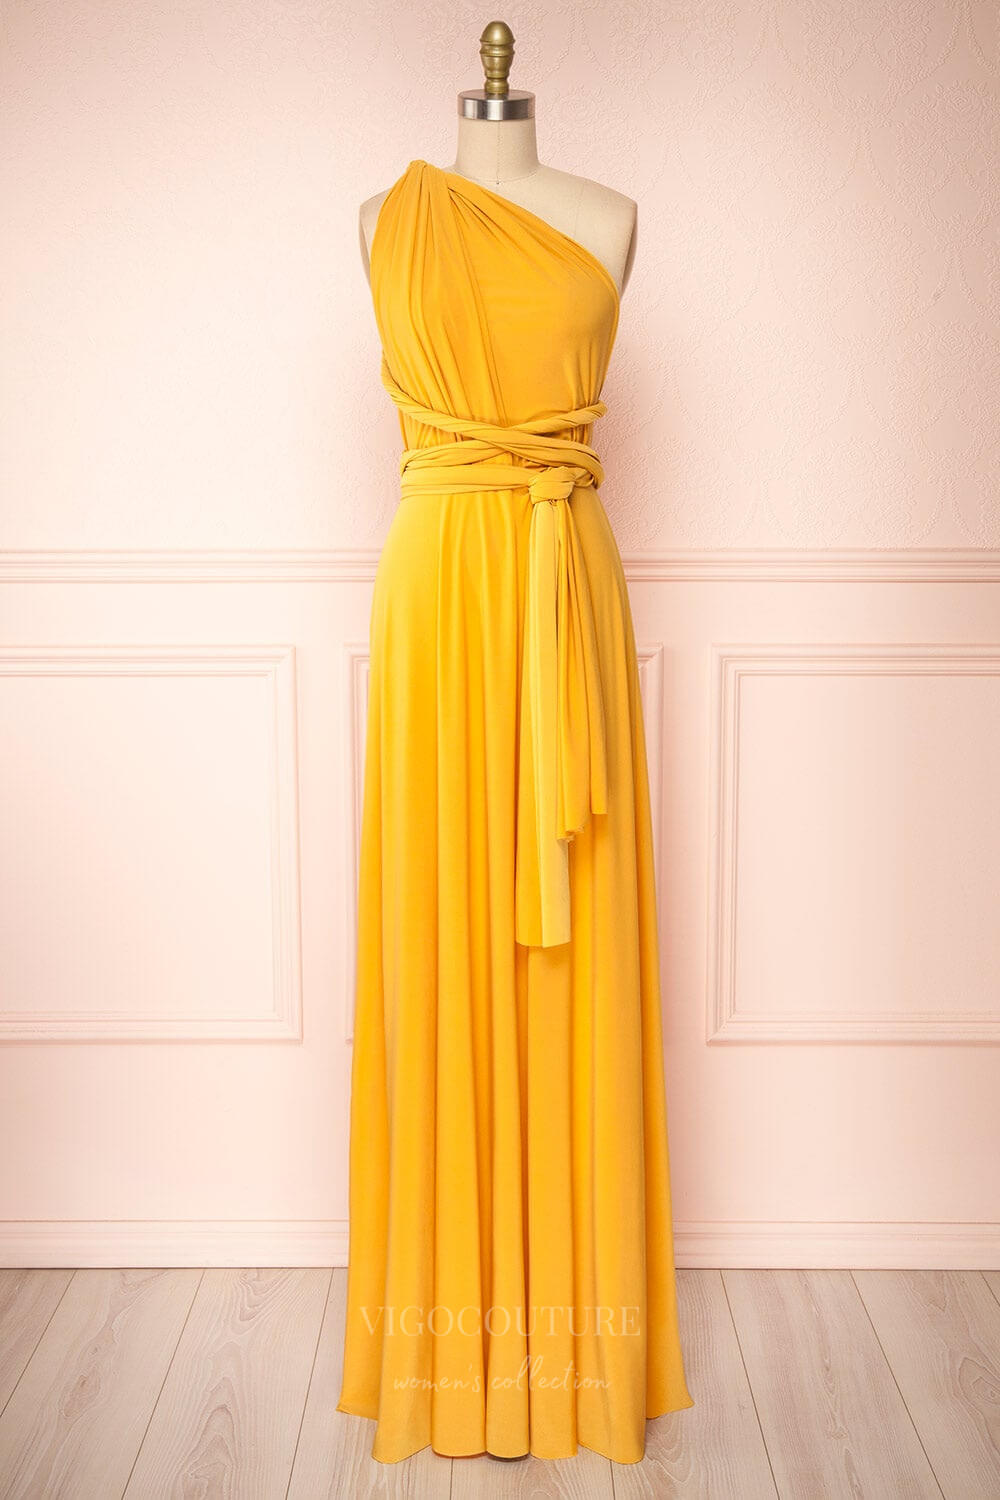 vigocouture-Convertible Bridesmaid Dress Stretchable Woven Dress Pleated Prom Dress Multiway Dress 20860-Prom Dresses-vigocouture-Yellow-US2-